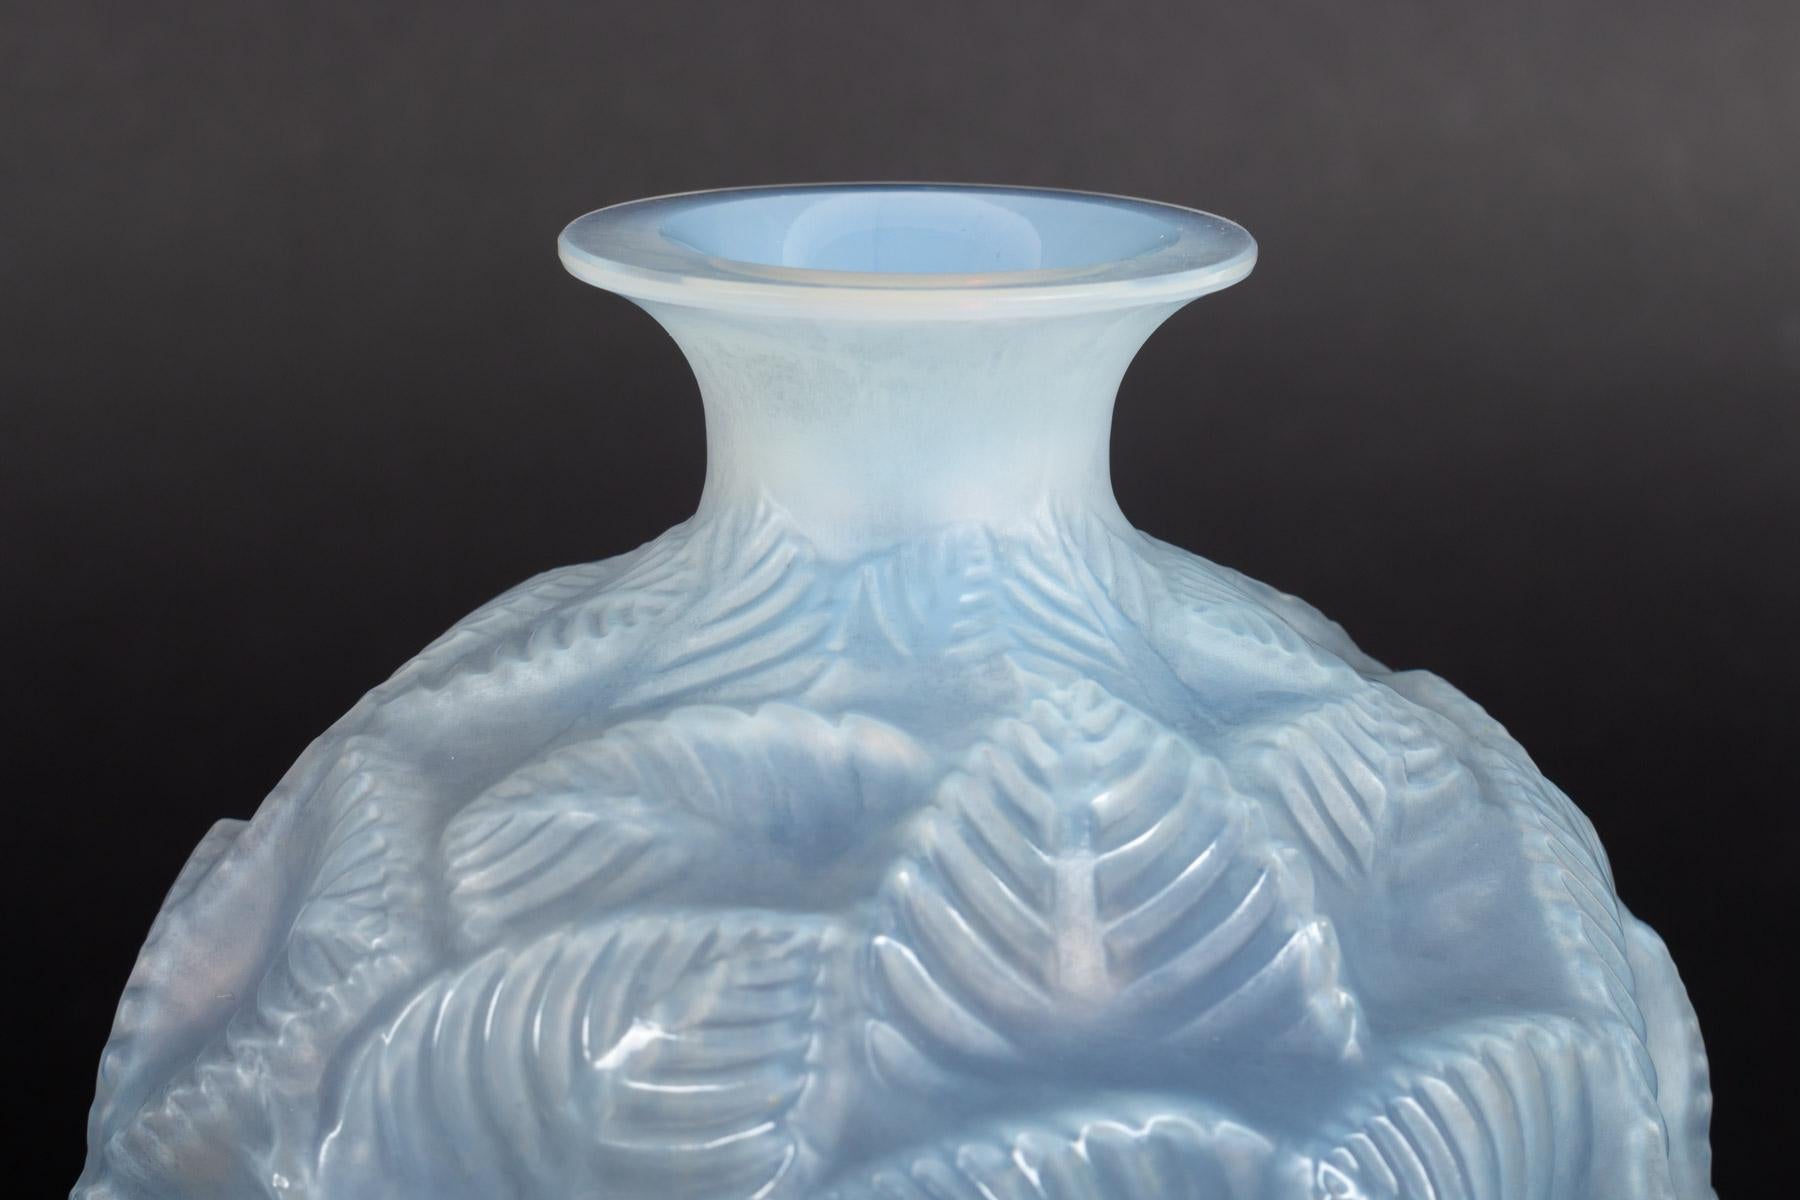 French 1926 René Lalique Ormeaux Vase in Cased Opalescent Glass with Blue Patina